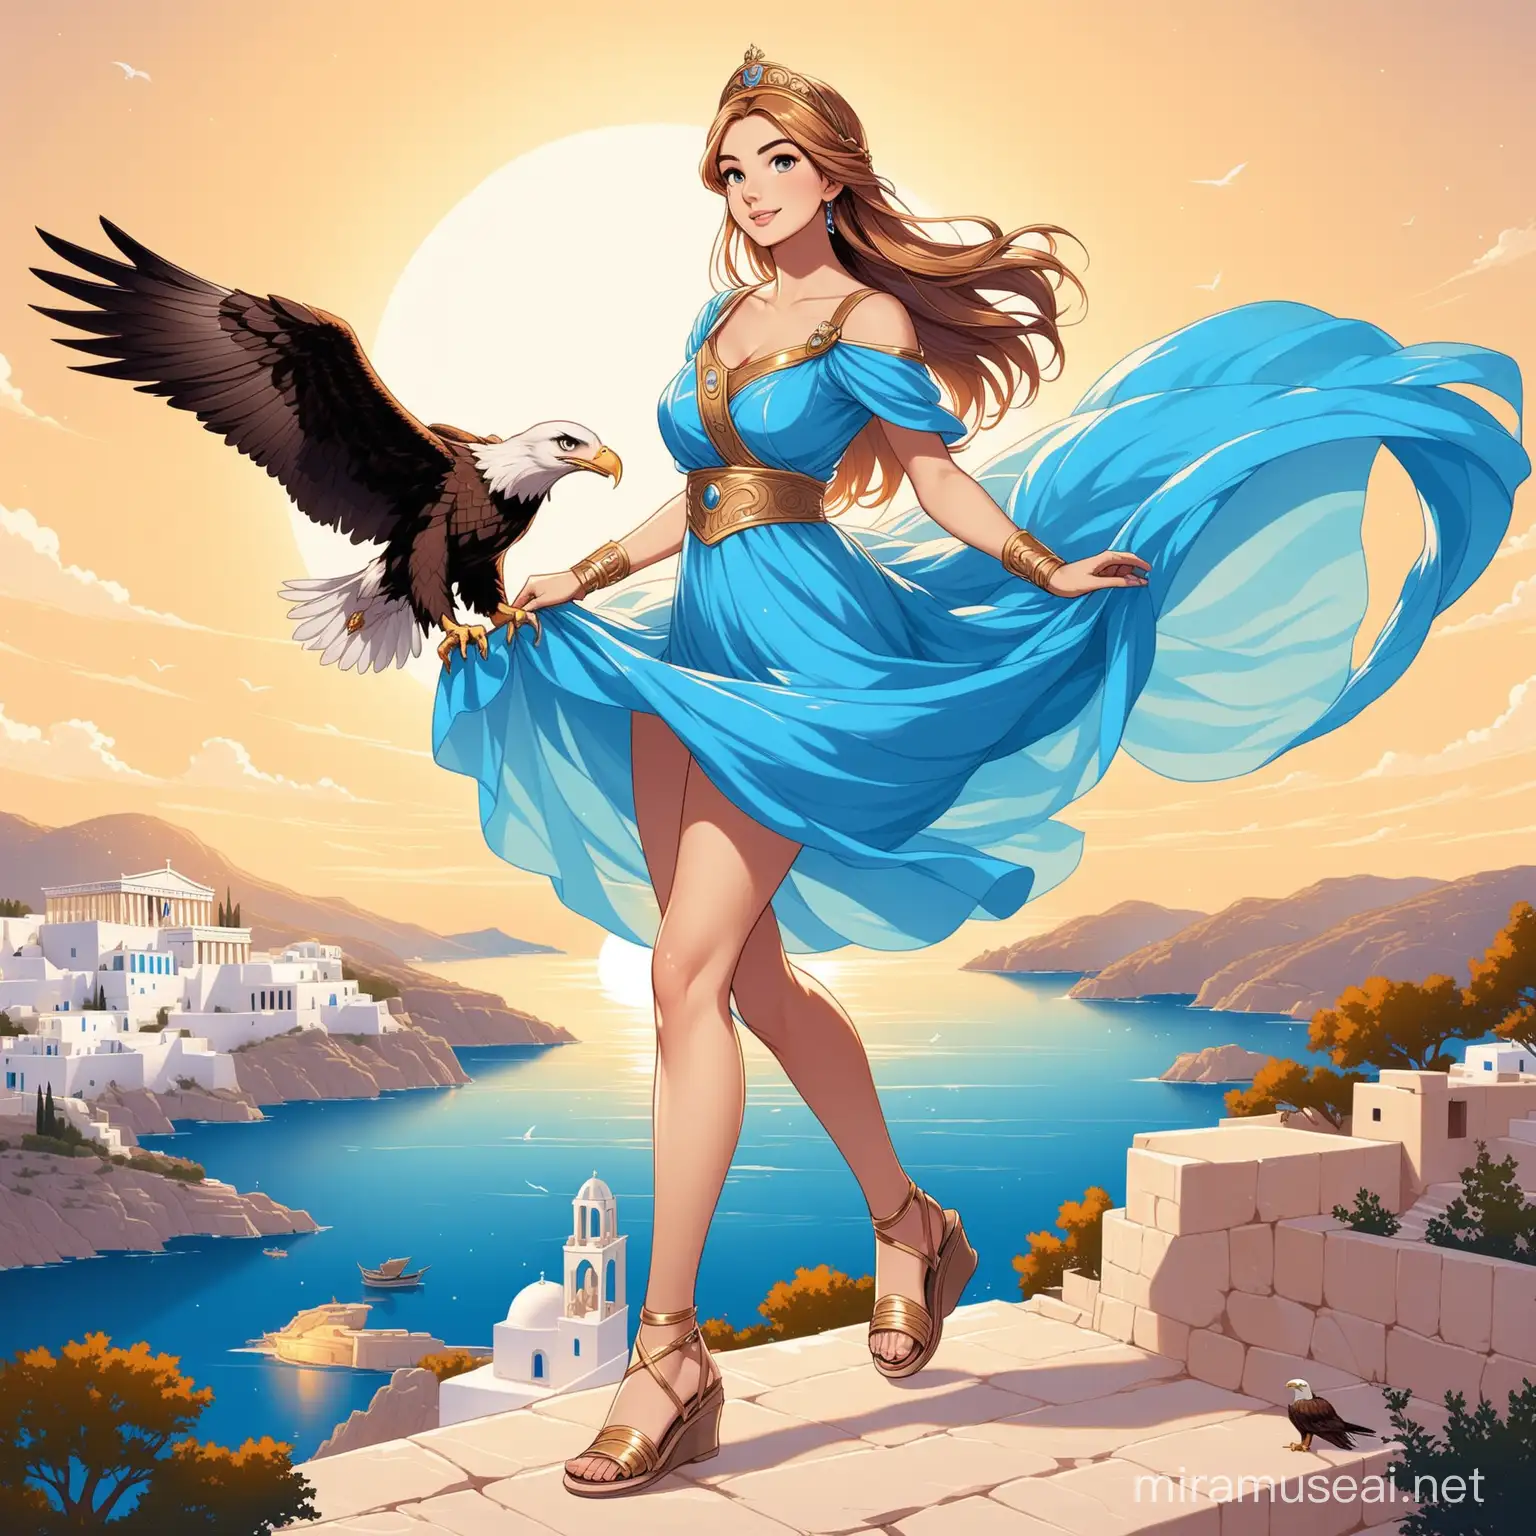 Greek Cinderella Flying with Eagle and Wearing Sandals